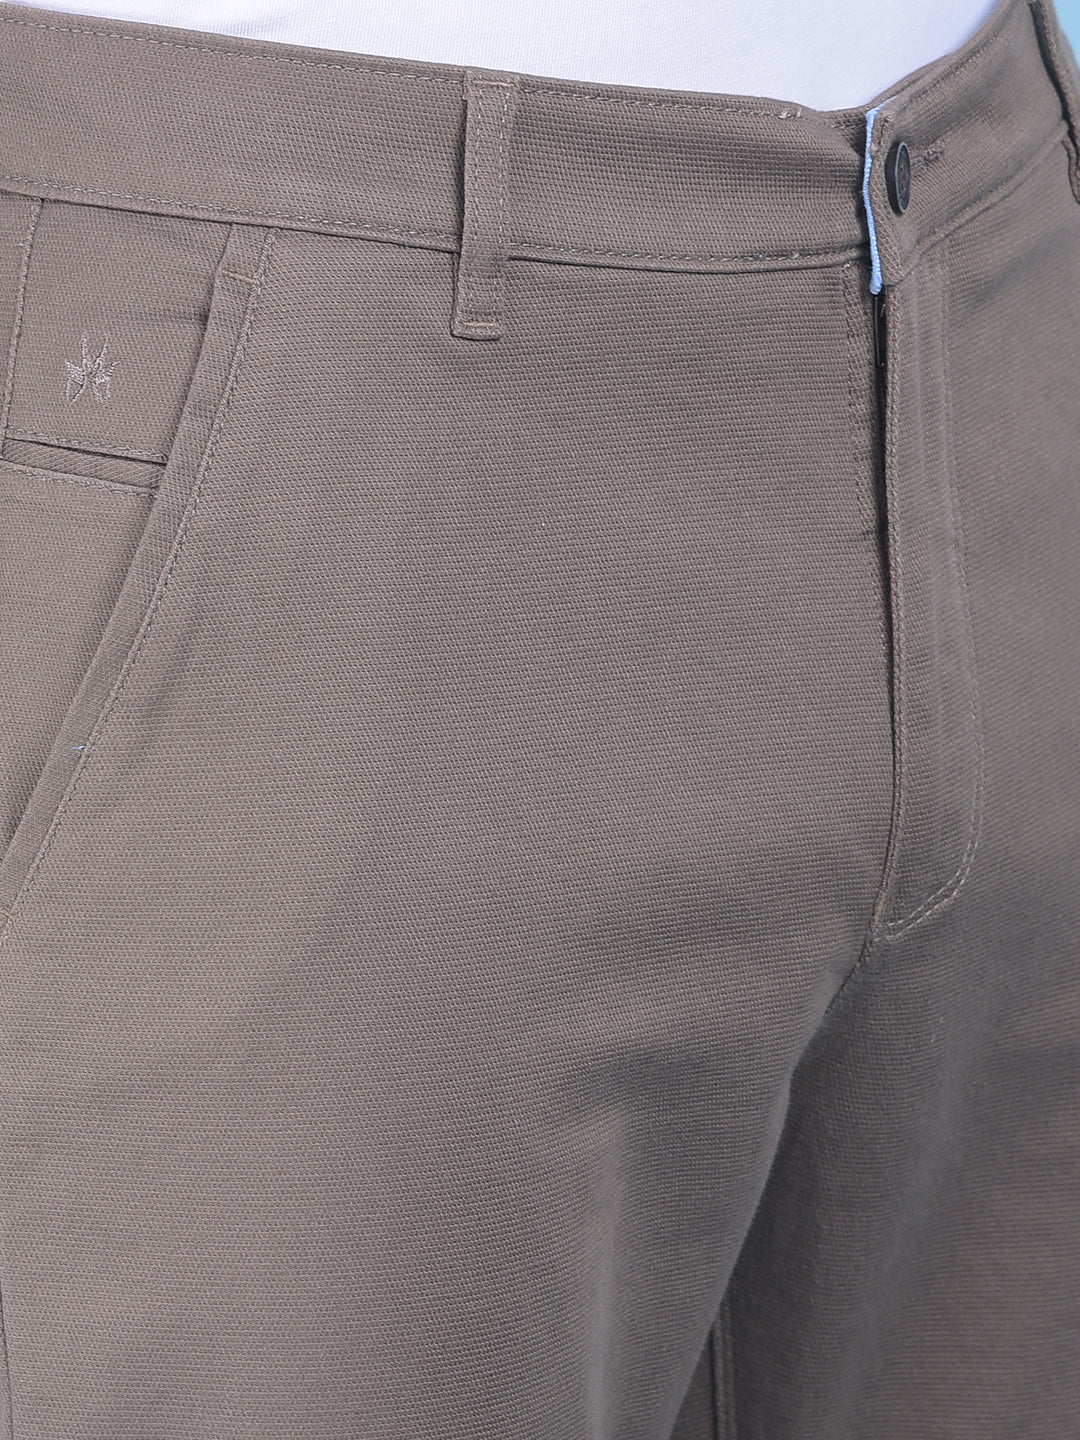 Brown Chinos Trousers-Men Trousers-Crimsoune Club